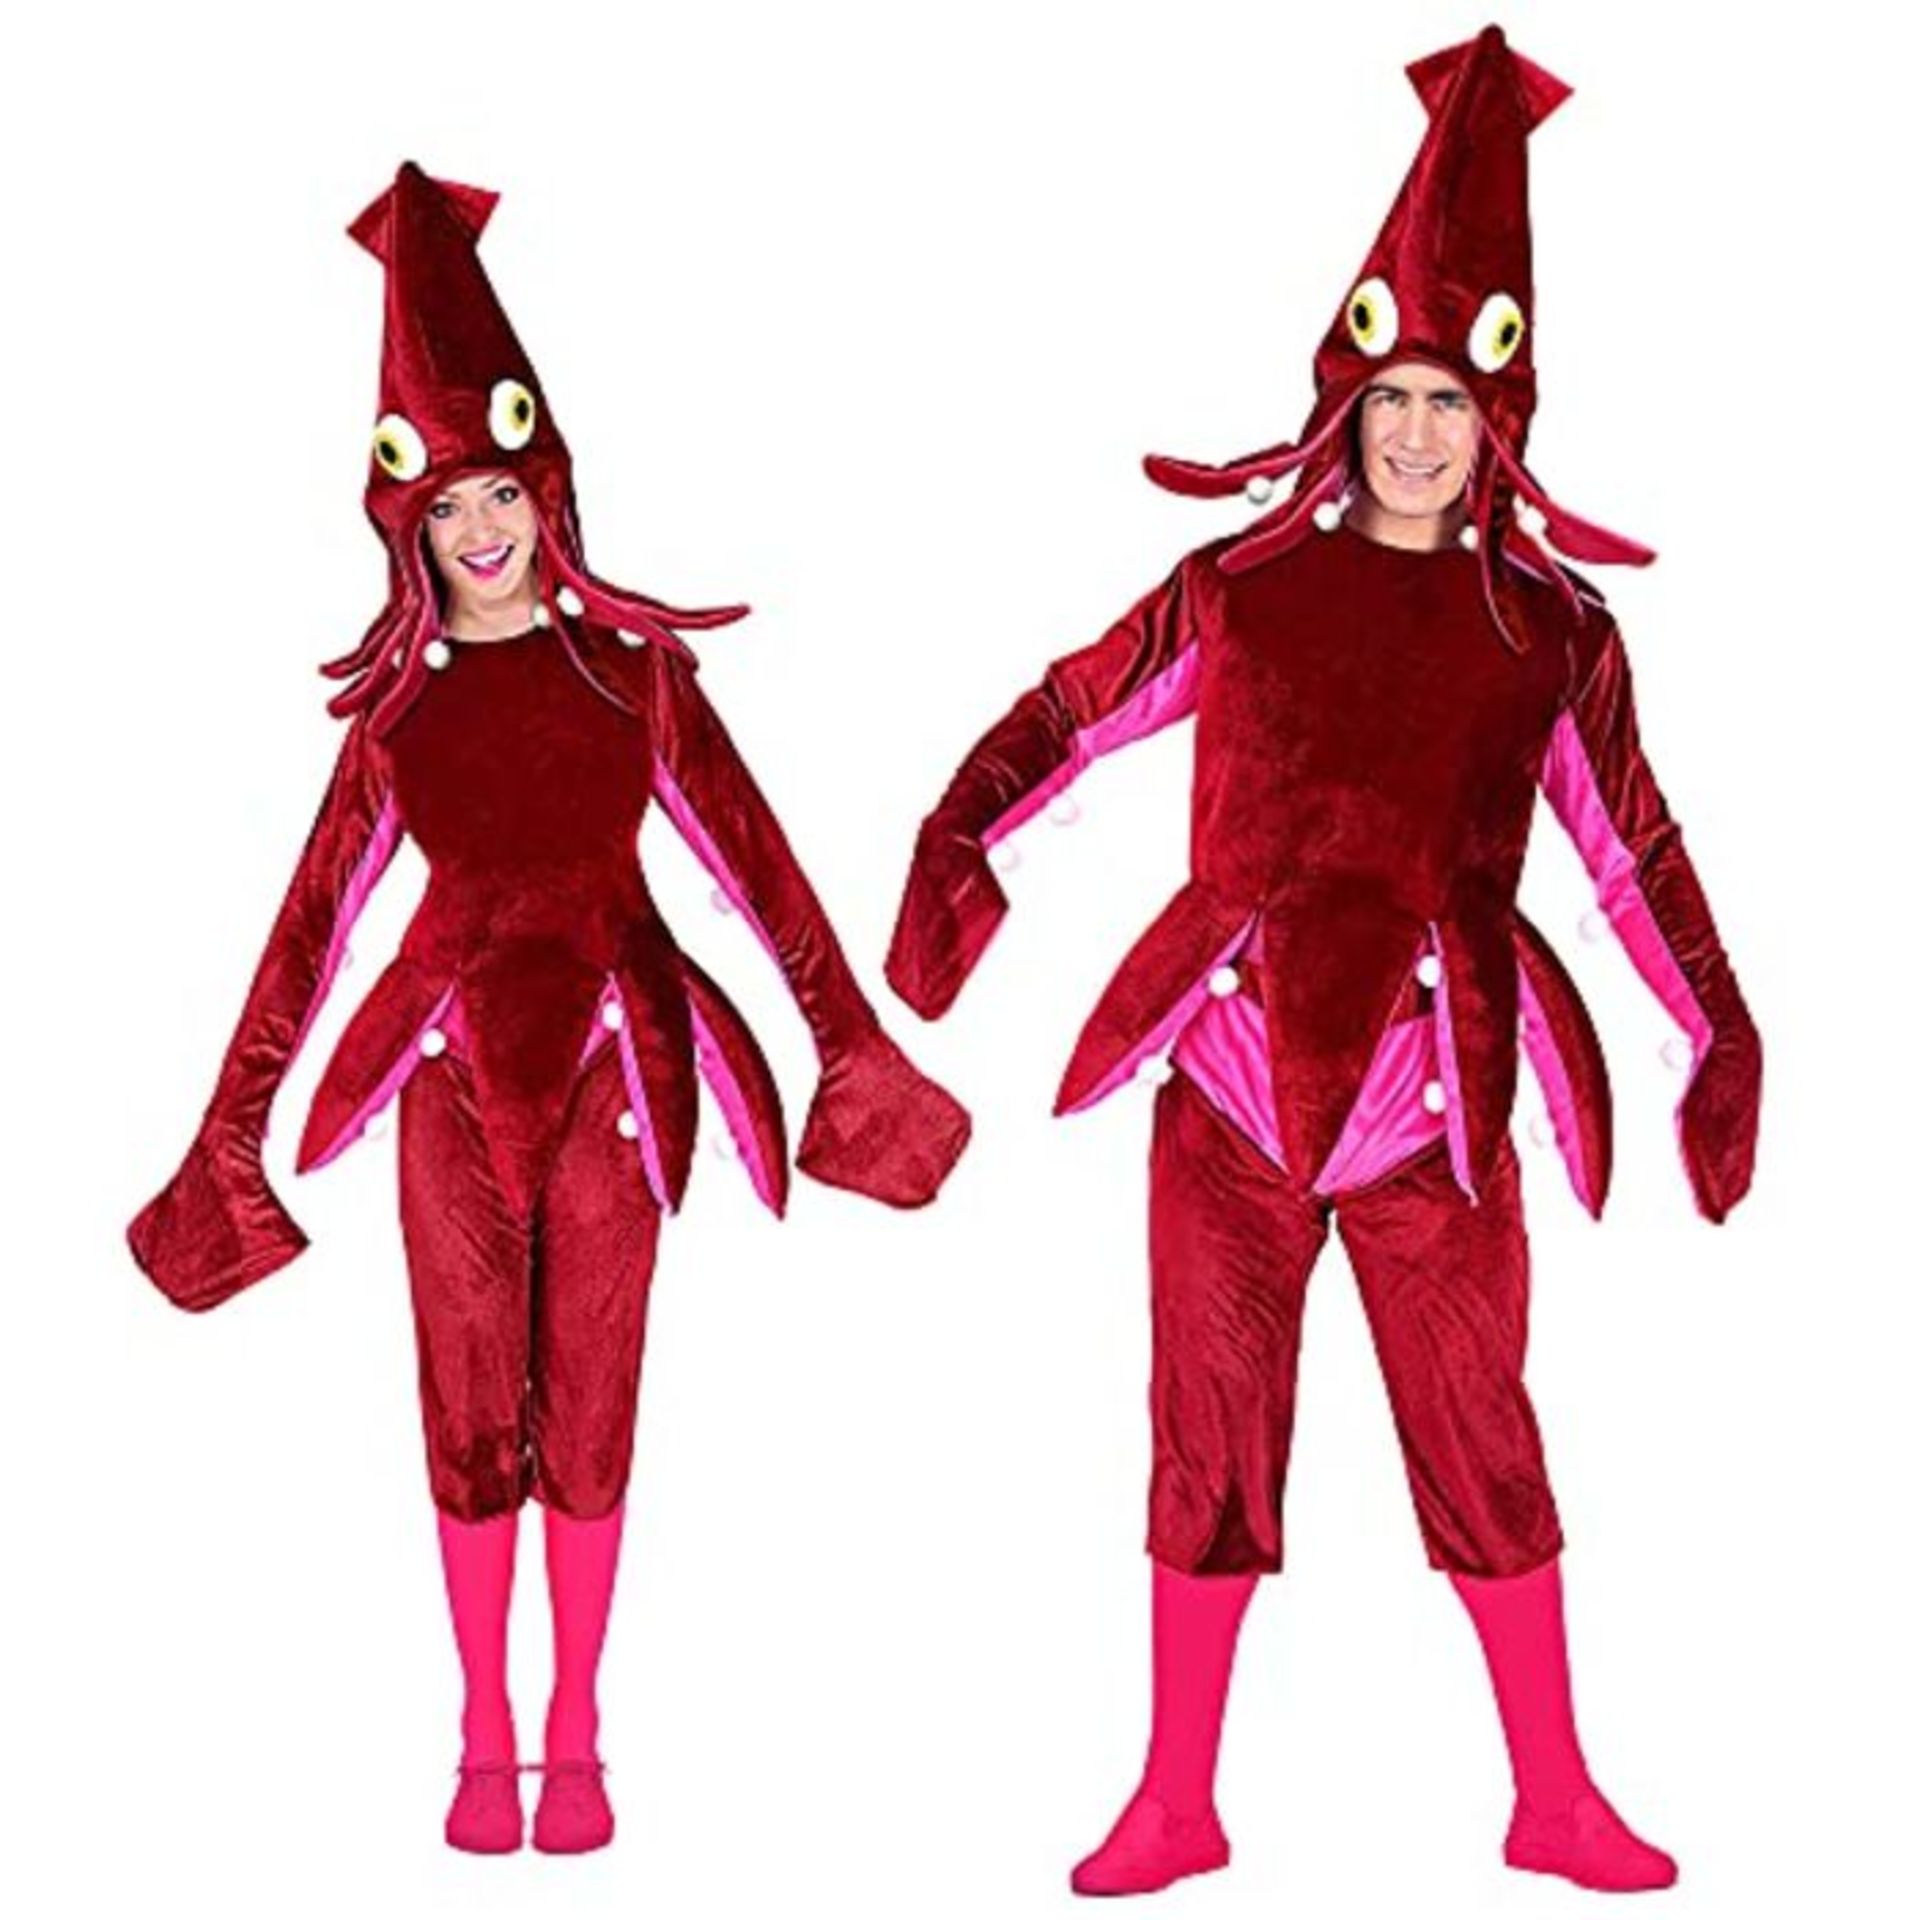 Fancy Dress Costume Unisex Squid Adult Outfit One Size Regular